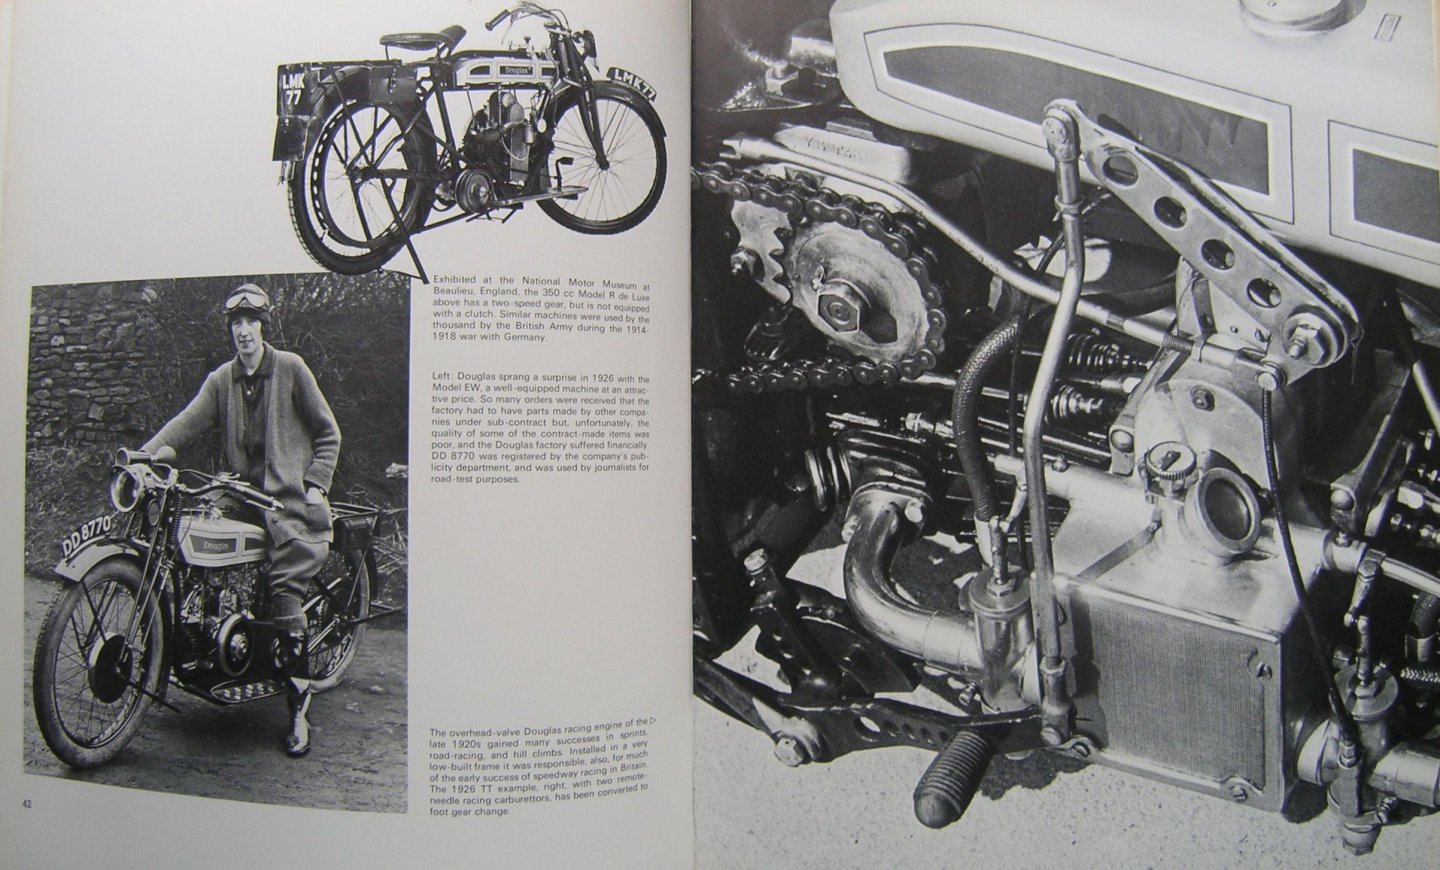 Louis, Harry & Bob Currie (Editors) - The Classic Motorcycles 1896-1950